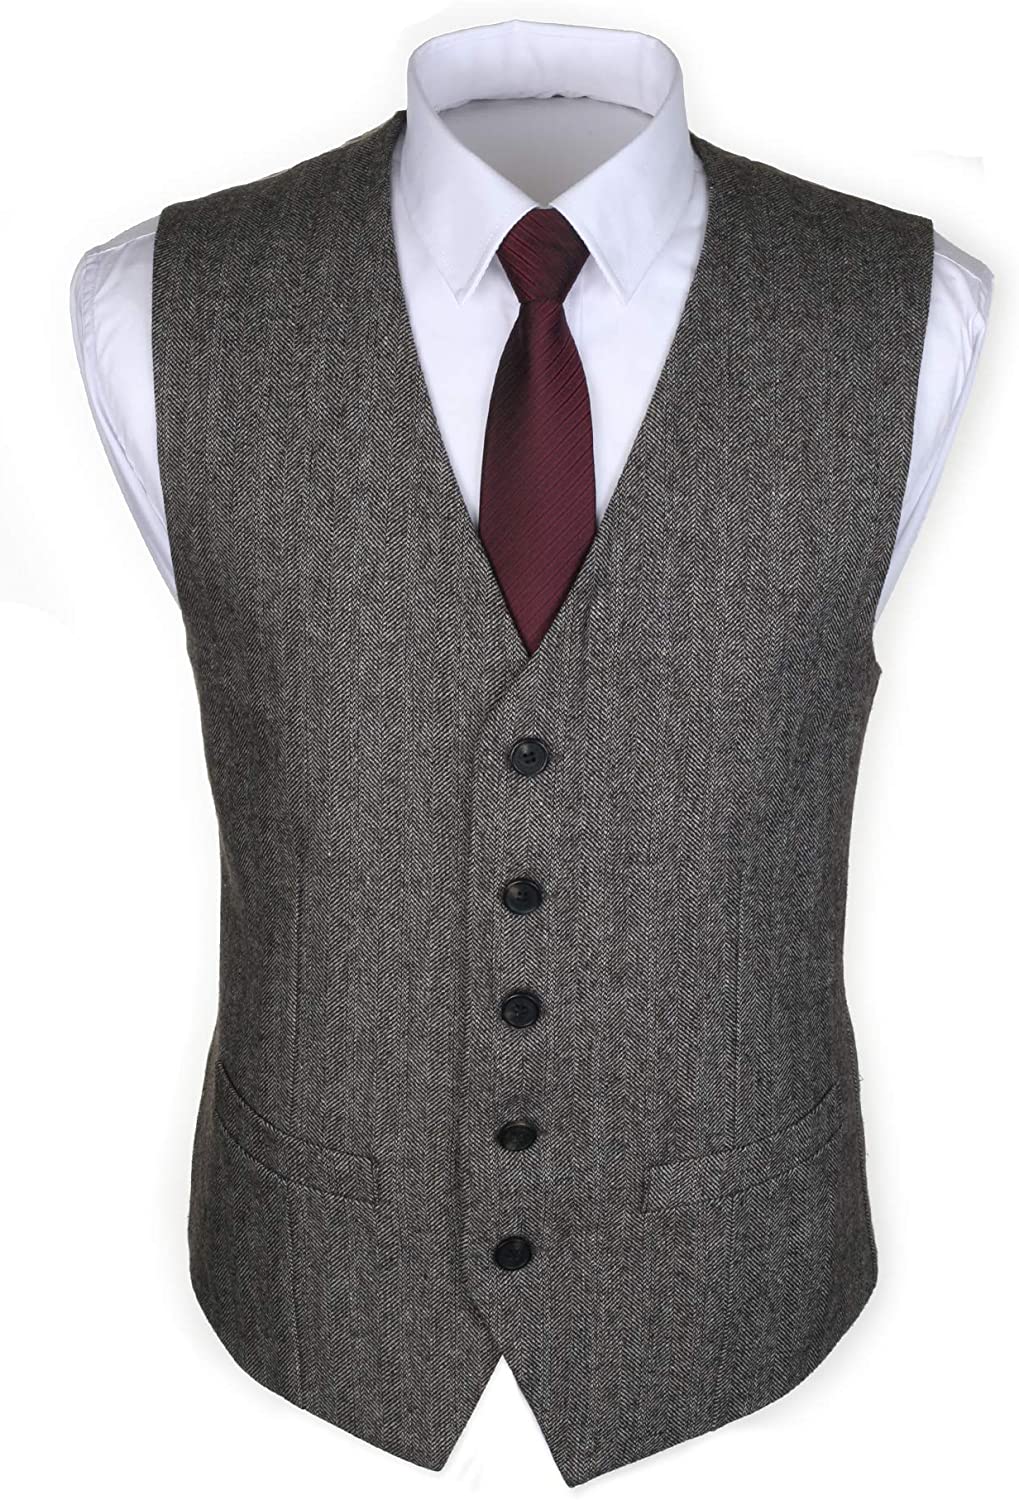 Ruth&Boaz Mens 2Pockets 4Buttons Business Tailored Collar Suit Waistcoat